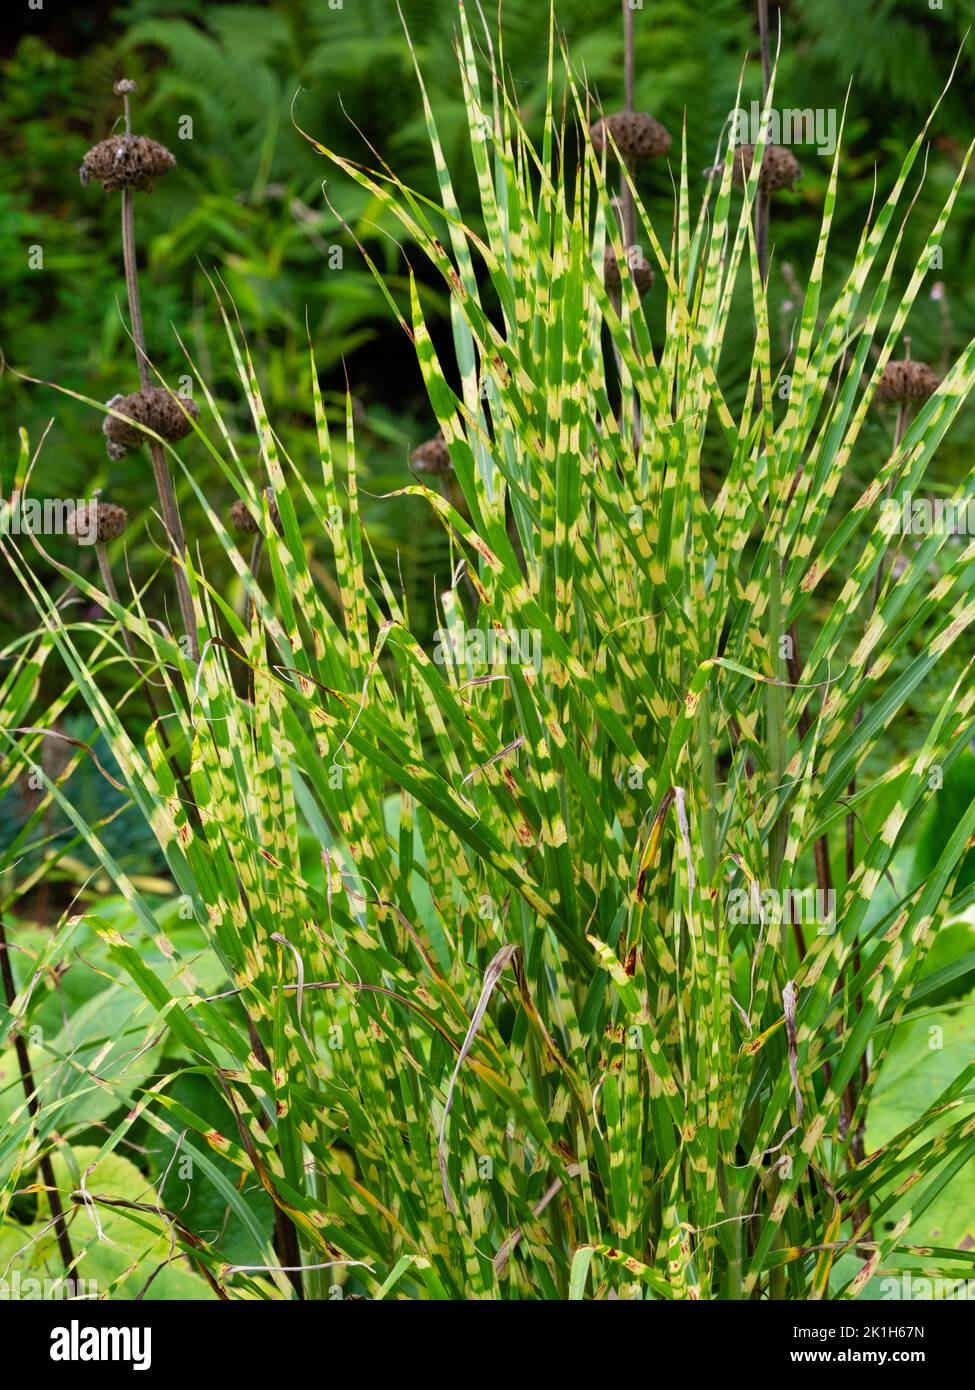 Yellow and green barred upright foliage of the hardy ornamental grass, Miscanthus sinensis 'Gold Bar' Stock Photo